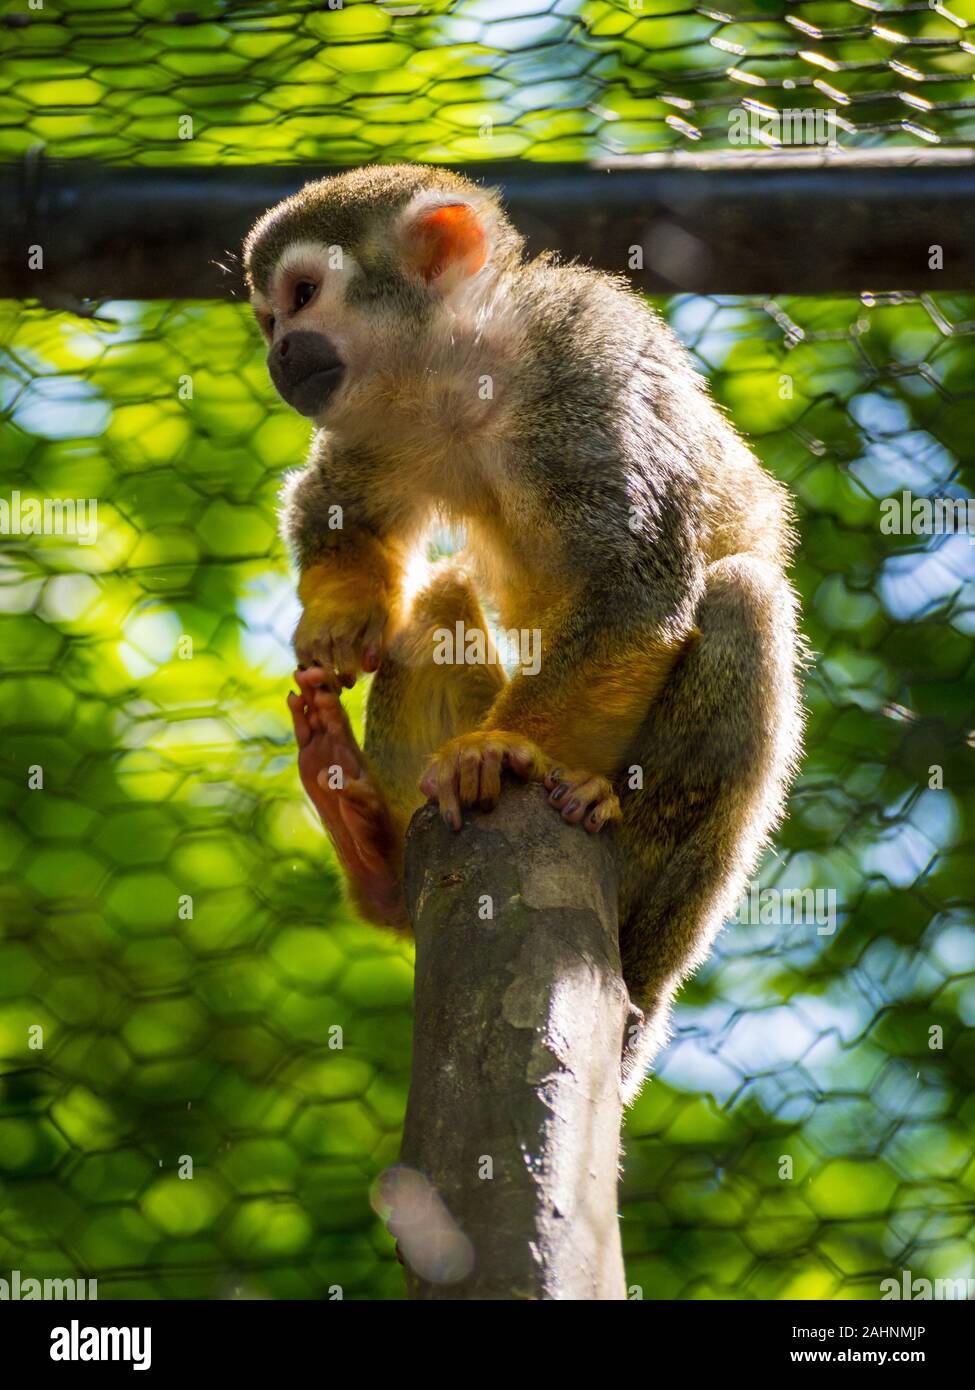 Squirrel Monkey on Branch in Cage, Zoo Animal, Outdoor Enclosure, Sunlight and Trees Stock Photo